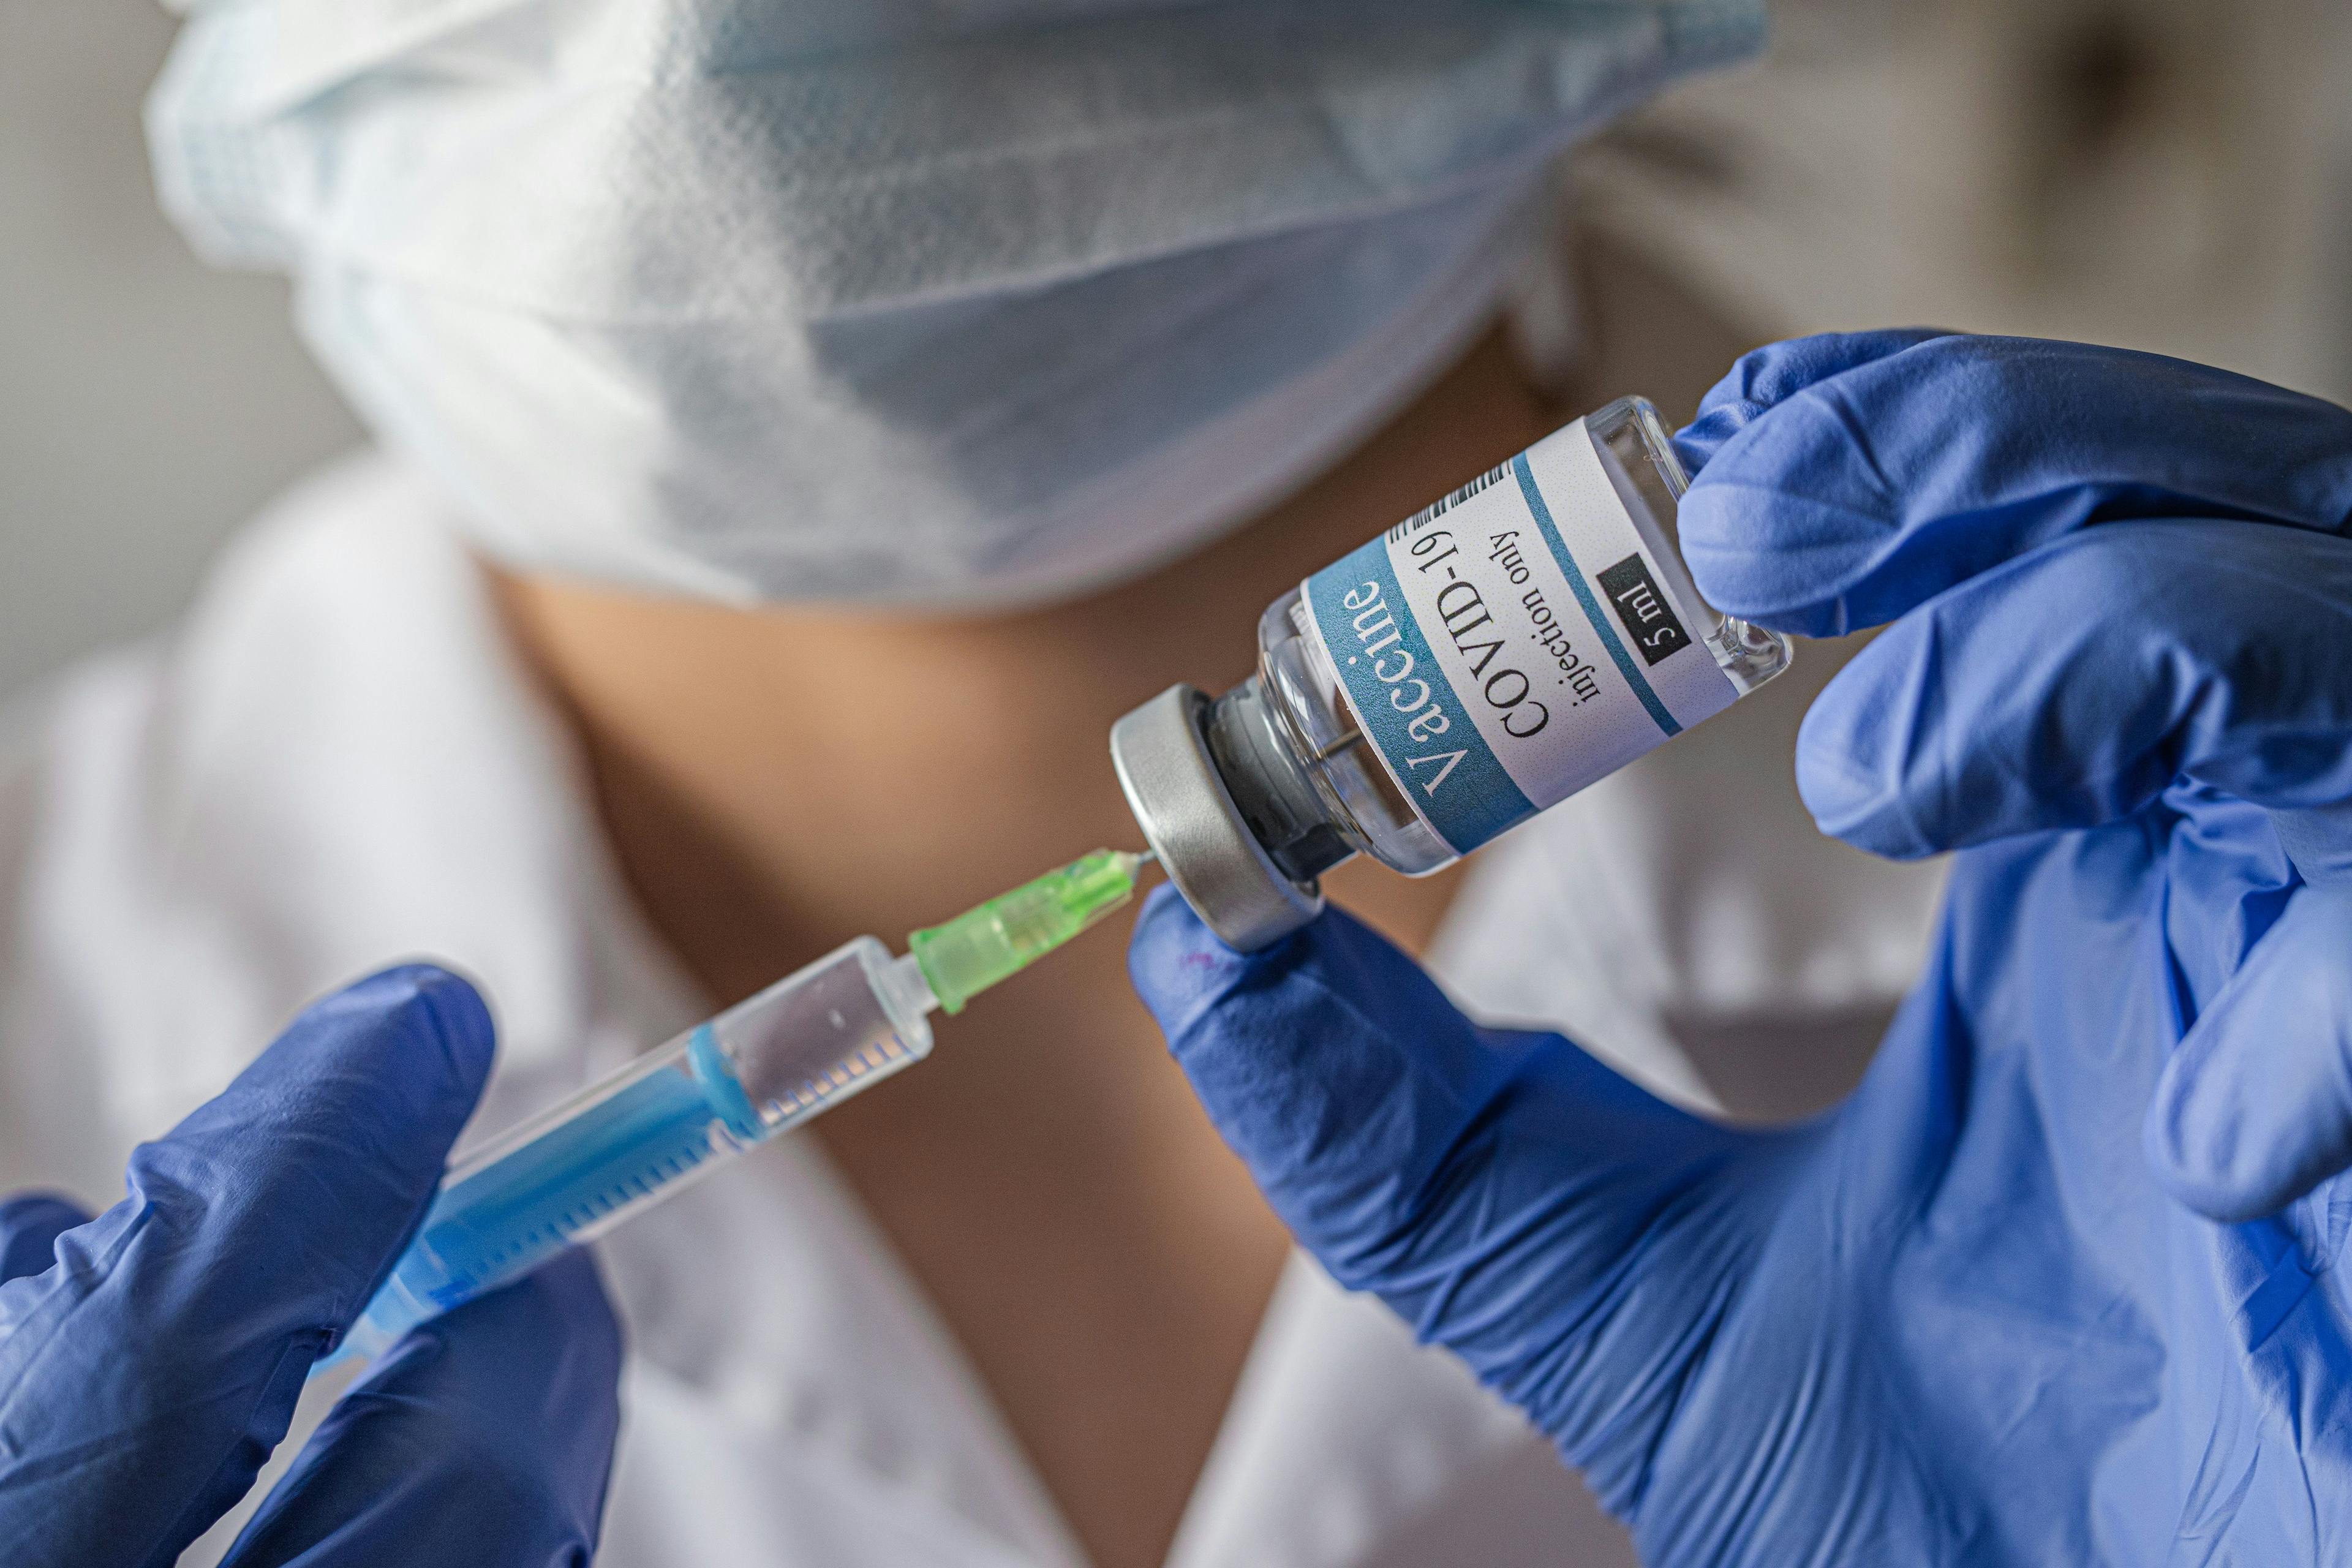 Breaking: Novavax COVID-19 Vaccine Authorized for Use 